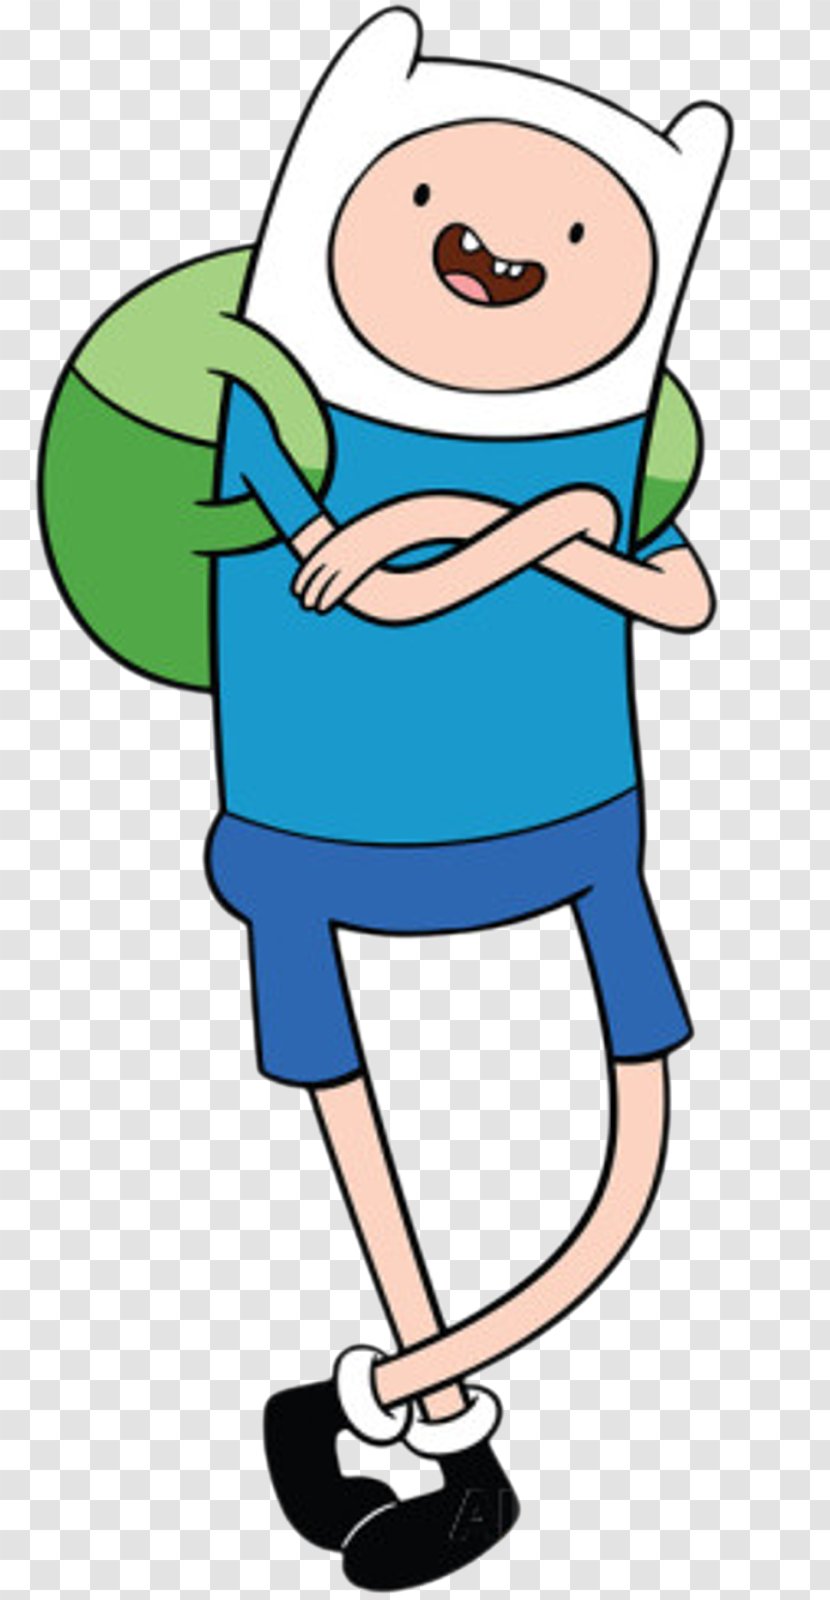 Finn The Human Jake Dog Marceline Vampire Queen Cartoon Network Universe: FusionFall - Standee - Characters Transparent PNG